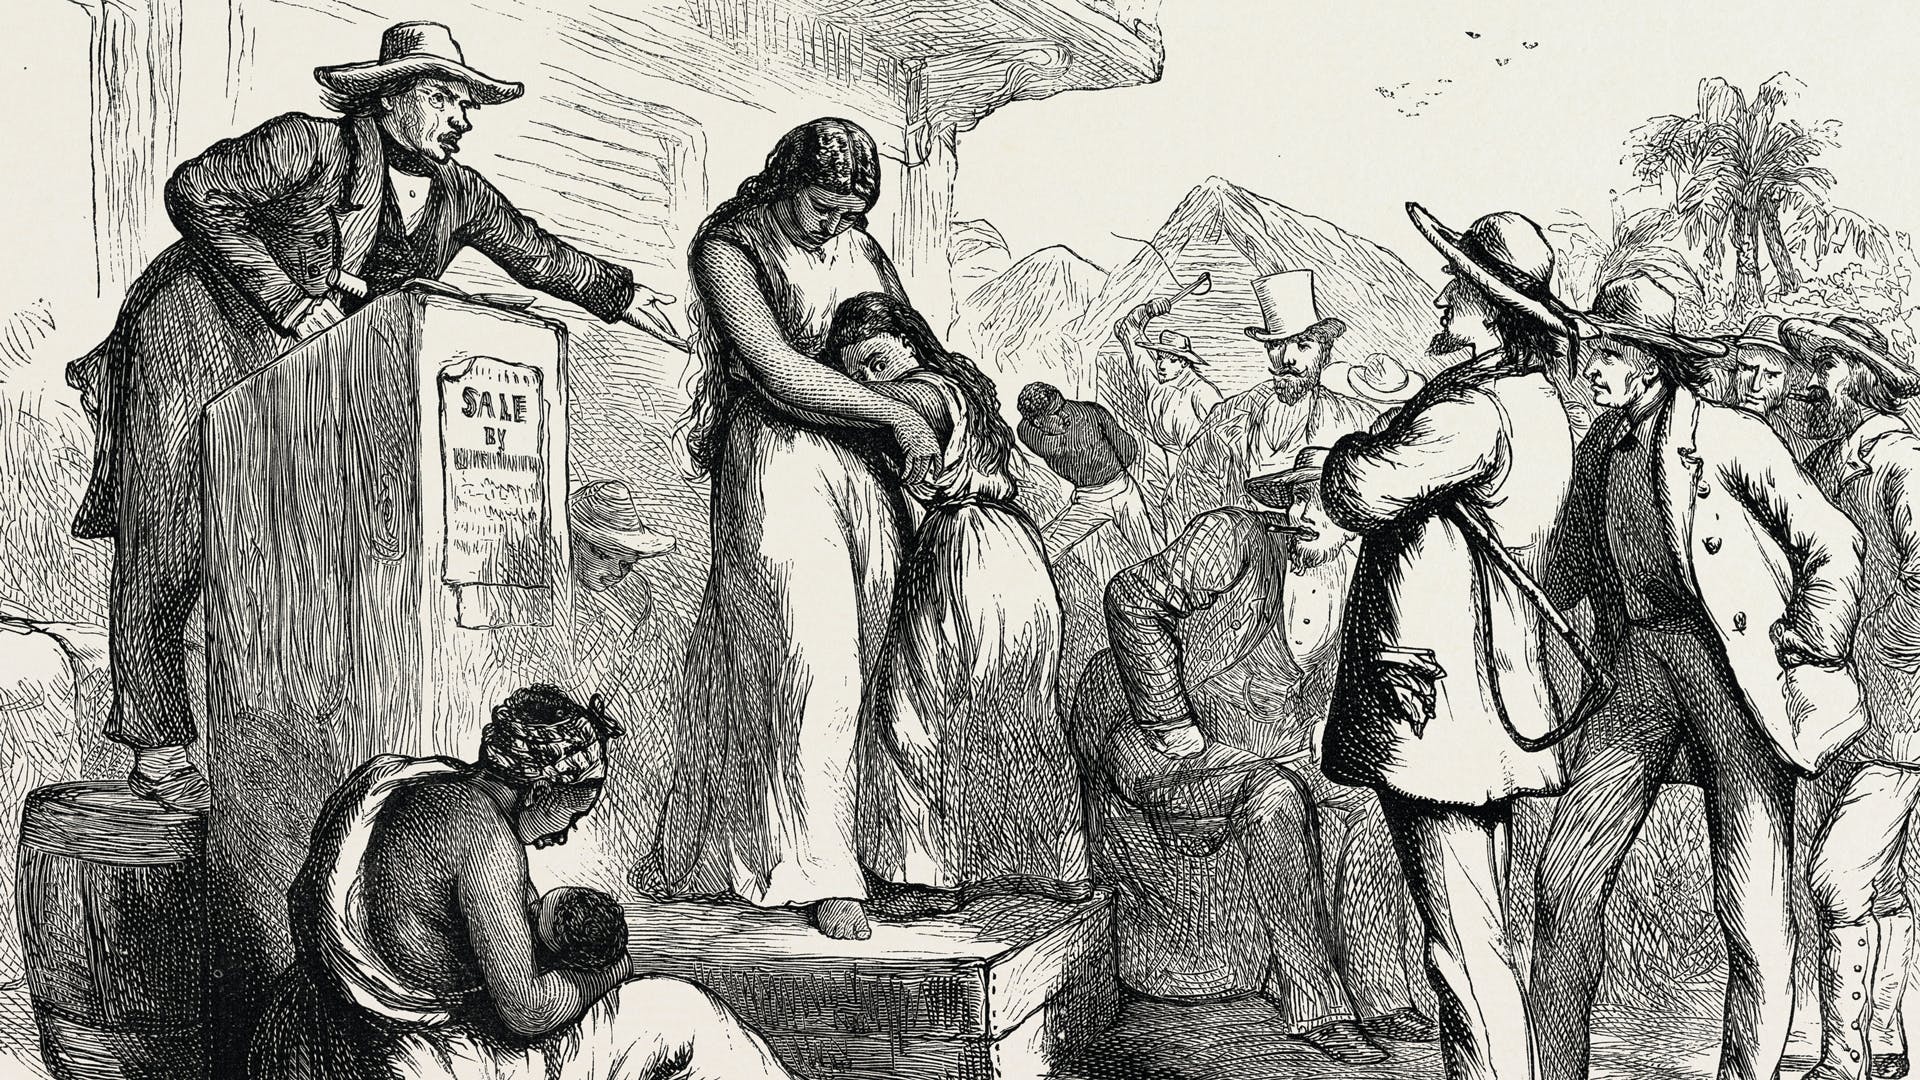 etching - US history - slavery - slave auction